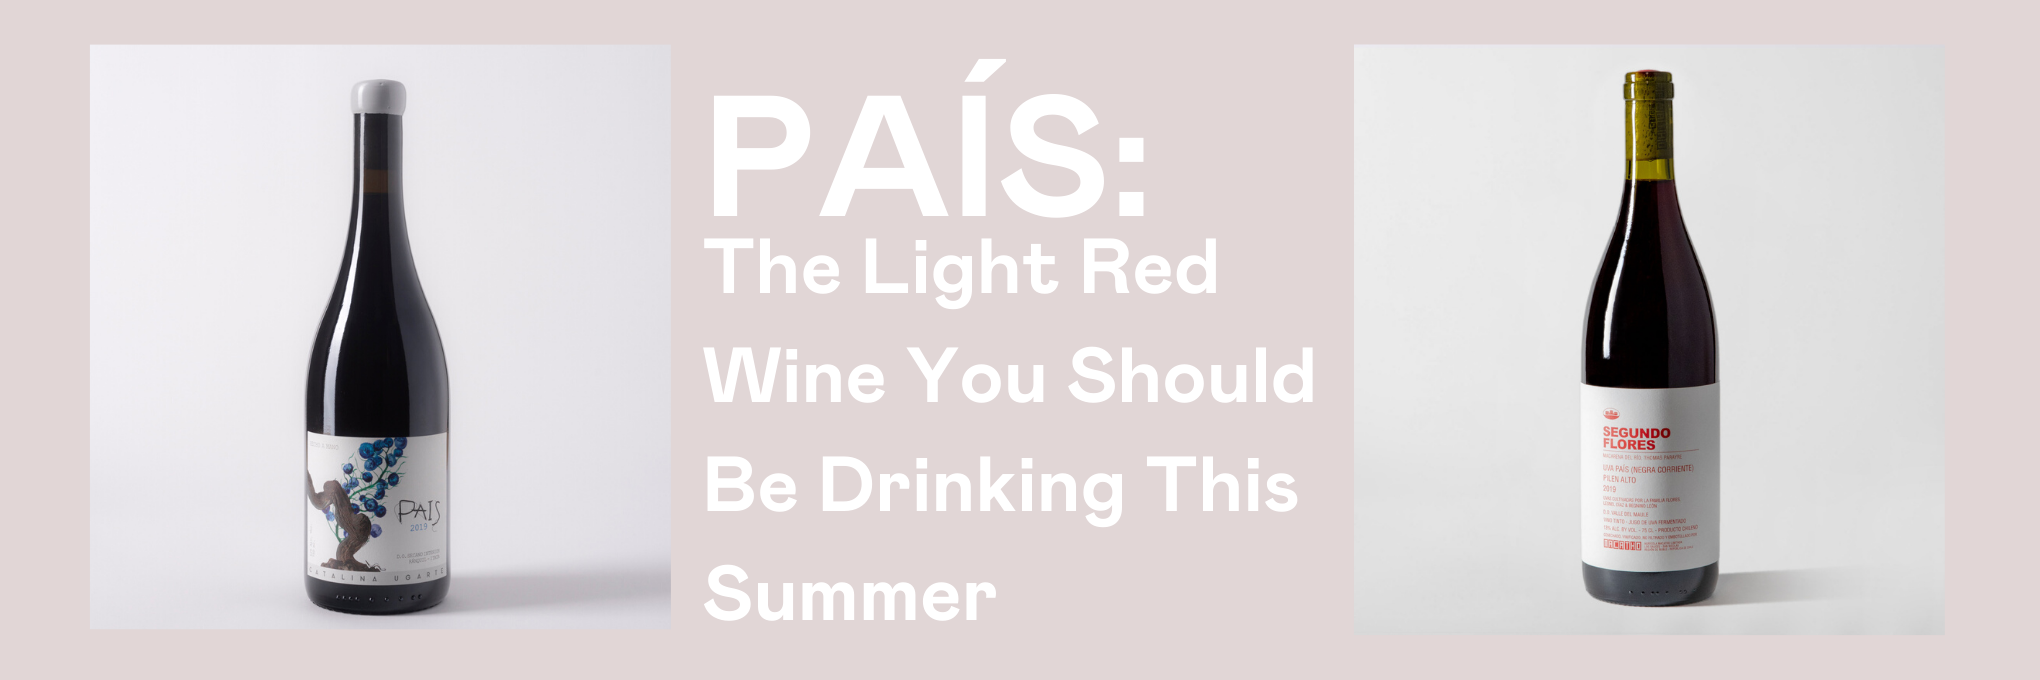 País: The Light Red Wine You Should Be Drinking This Summer's Article Visual